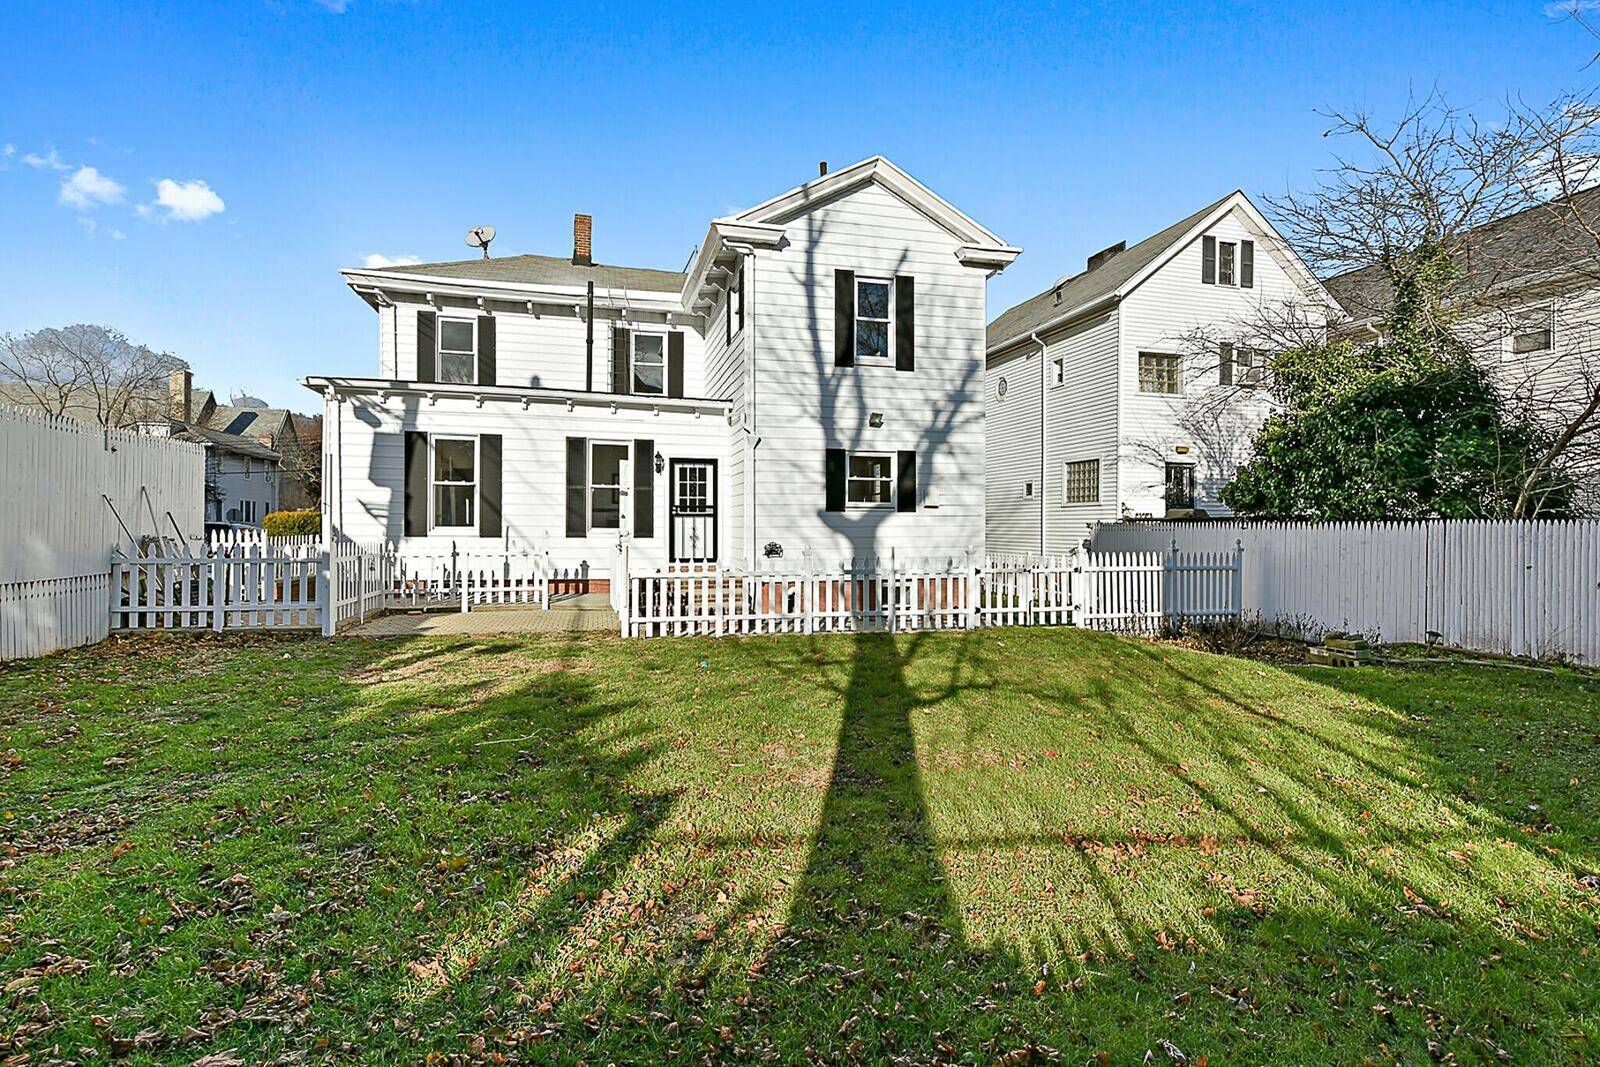 COMPLETELY RENOVATED and MAGNIFICENTLY MAINTAINED CHARMING CENTER HALL COLONIAL NORTH RIVERDALE HOME.